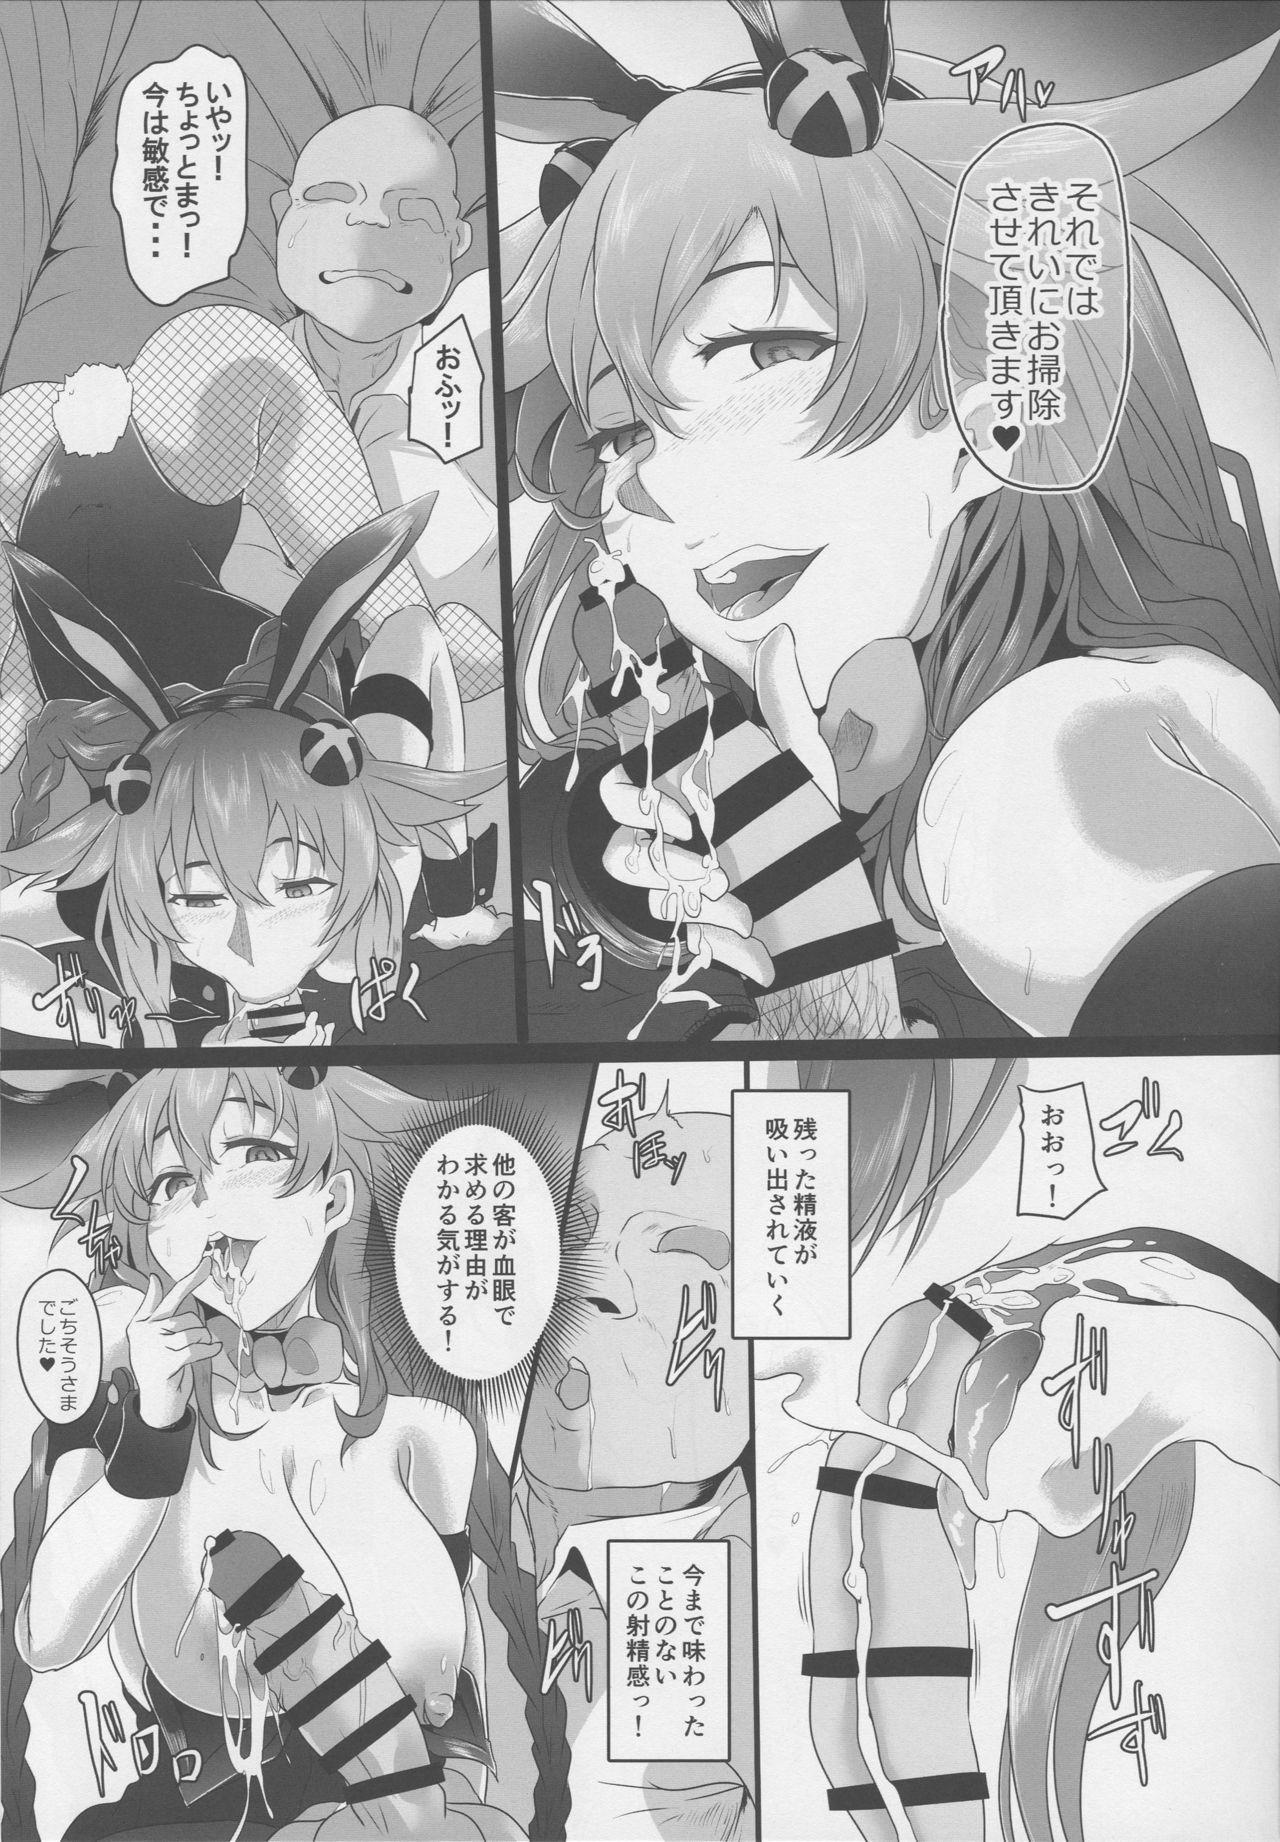 Pounded Fallen Heart Another √Chaos - Hyperdimension neptunia Gloryholes - Page 12